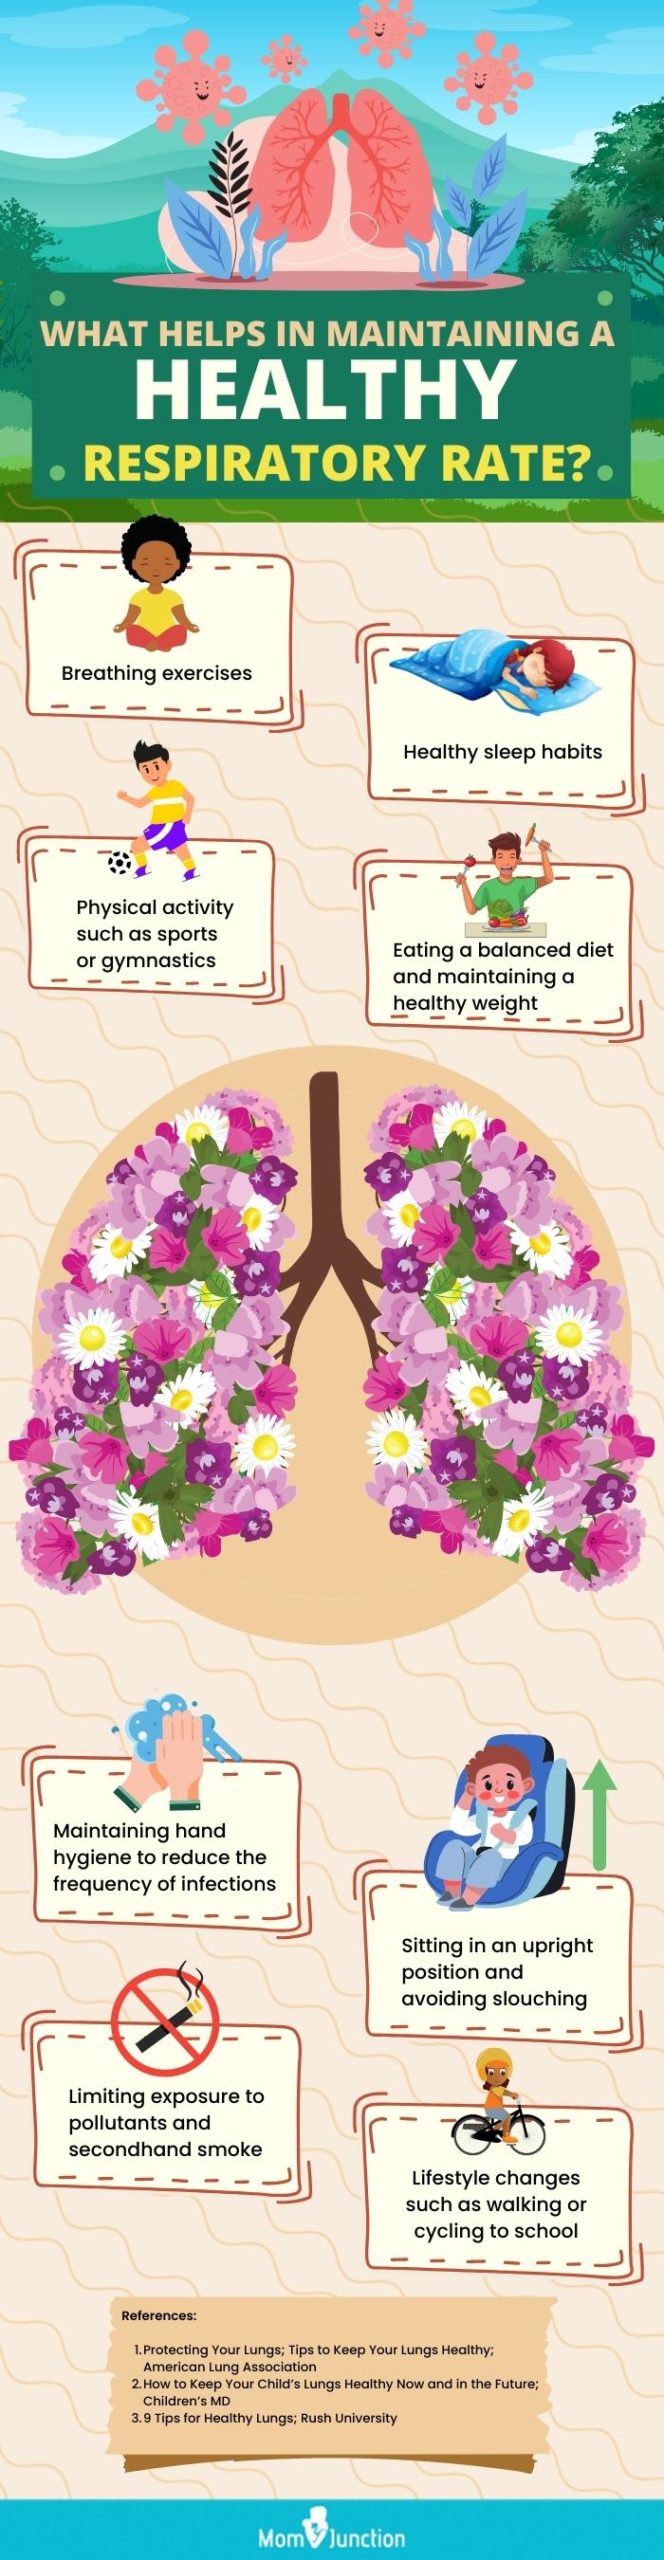 what helps in maintaining a healthy respiratory rate [infographic]